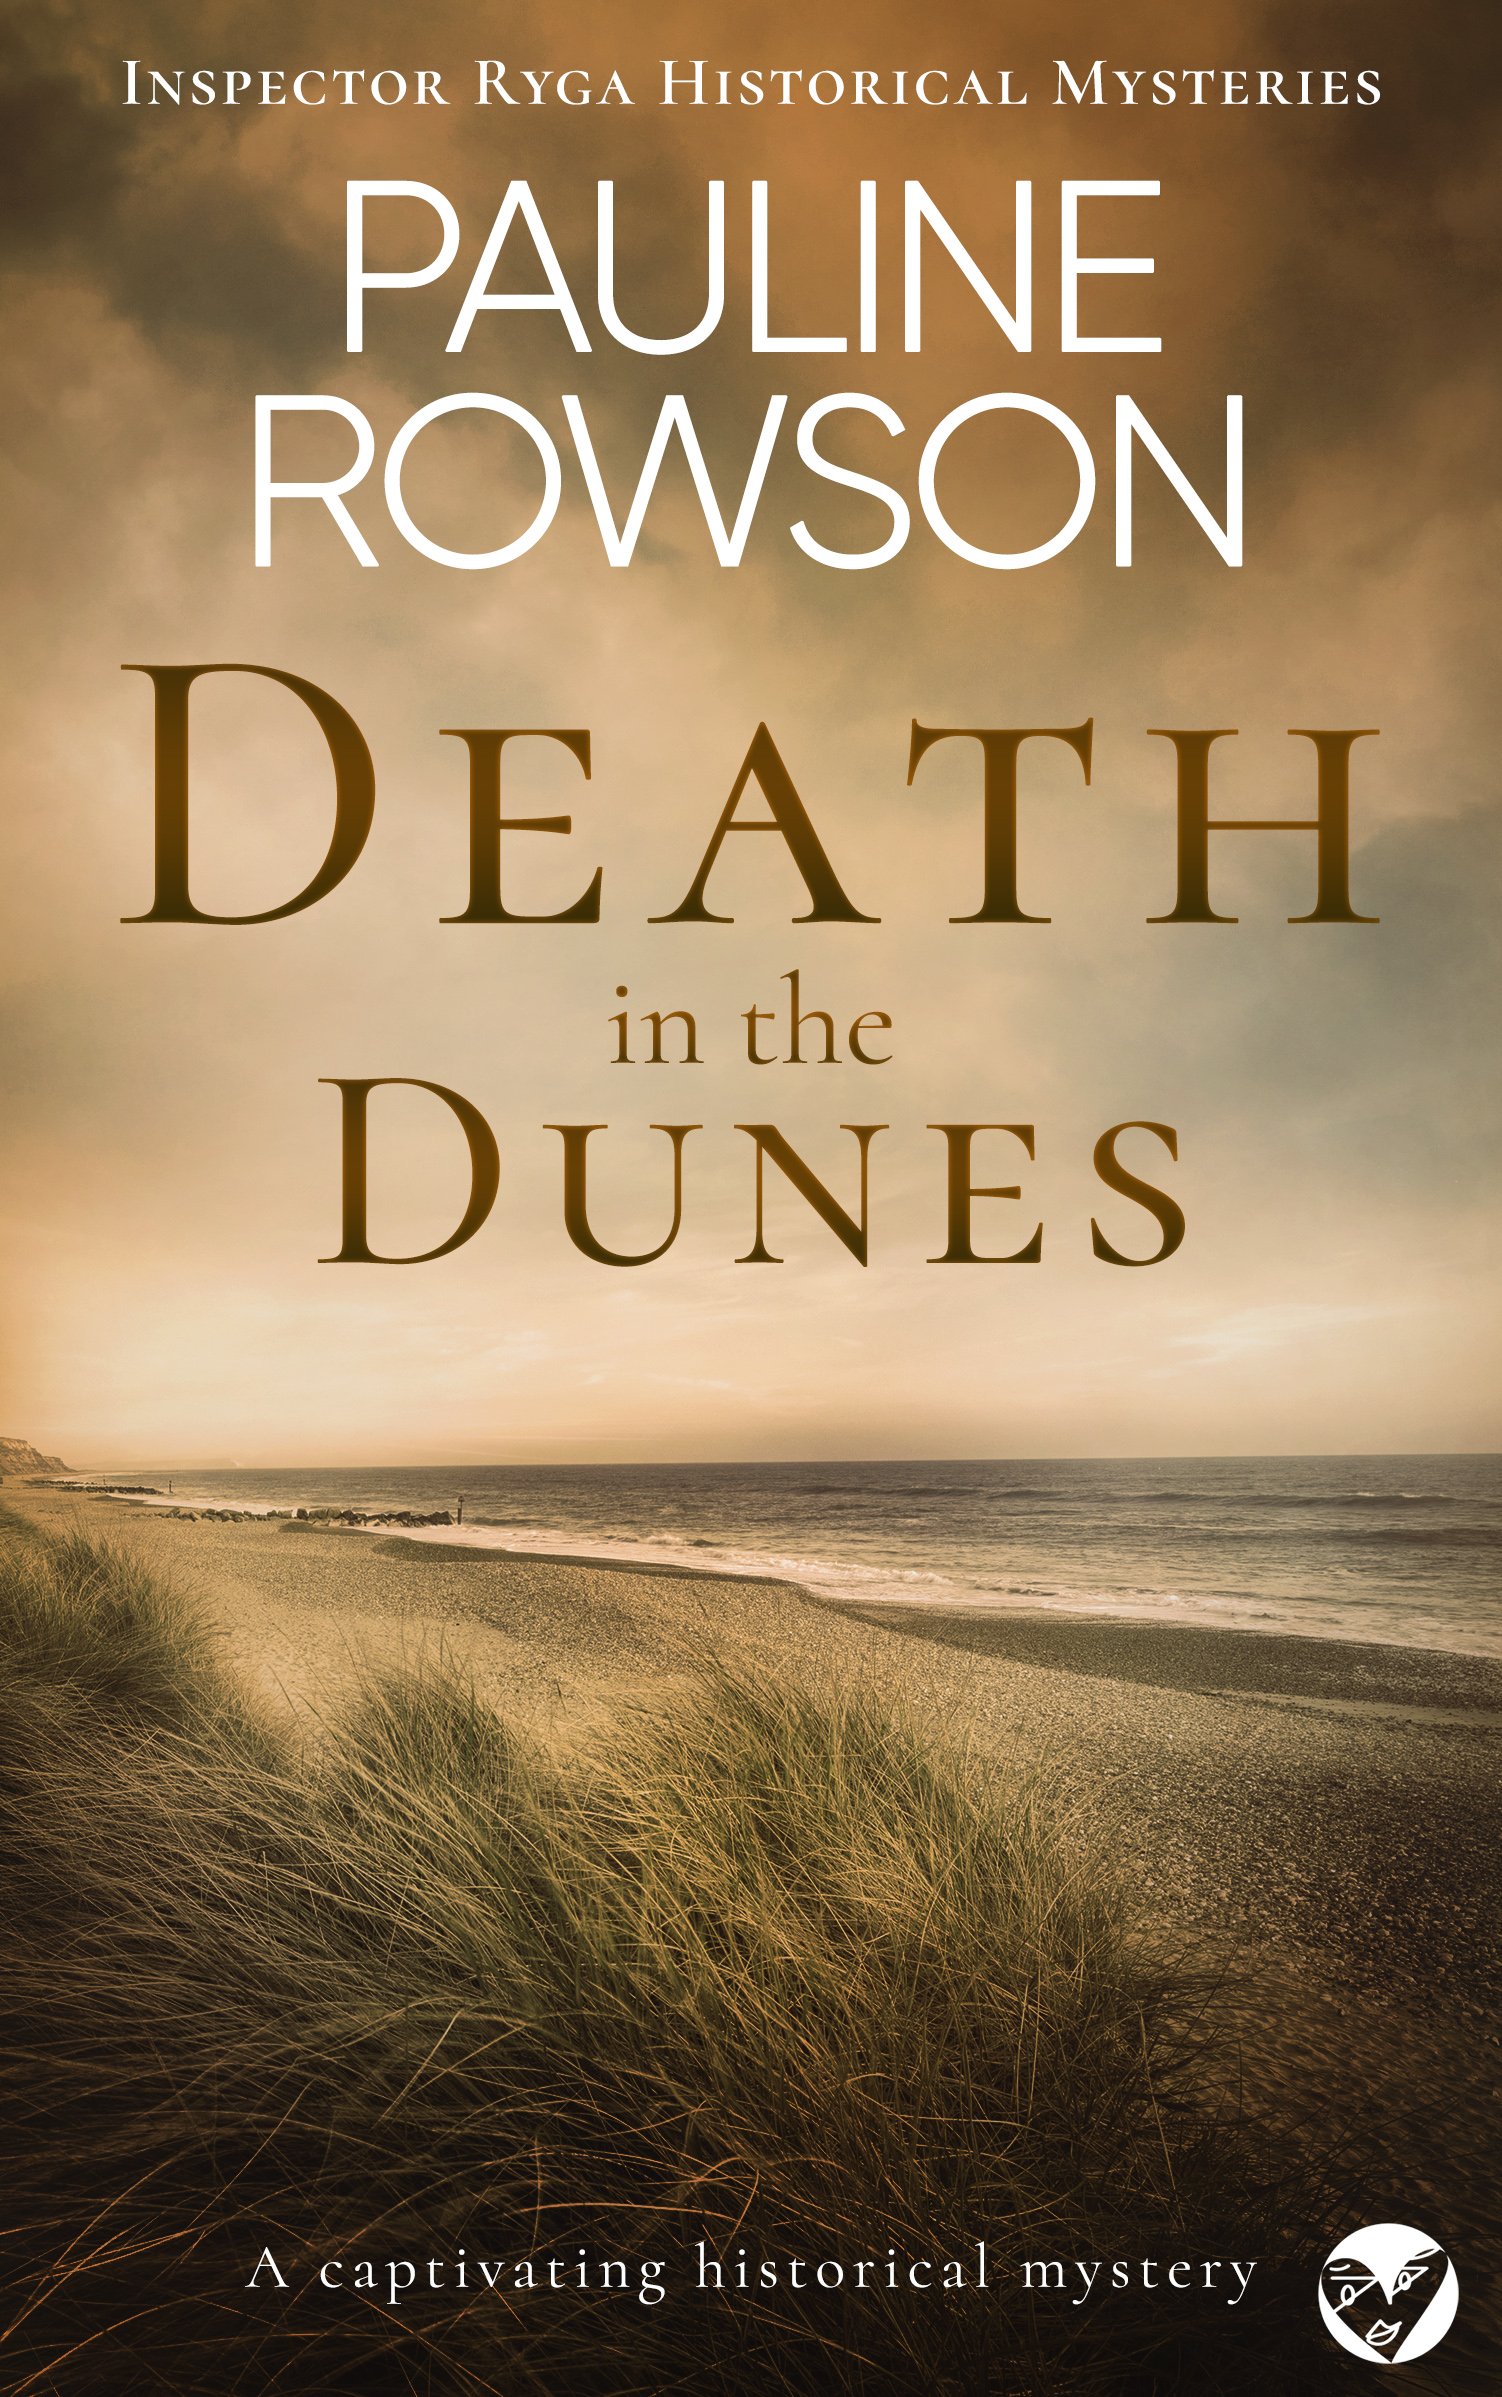 DEATH IN THE DUNES Cover publish.jpg